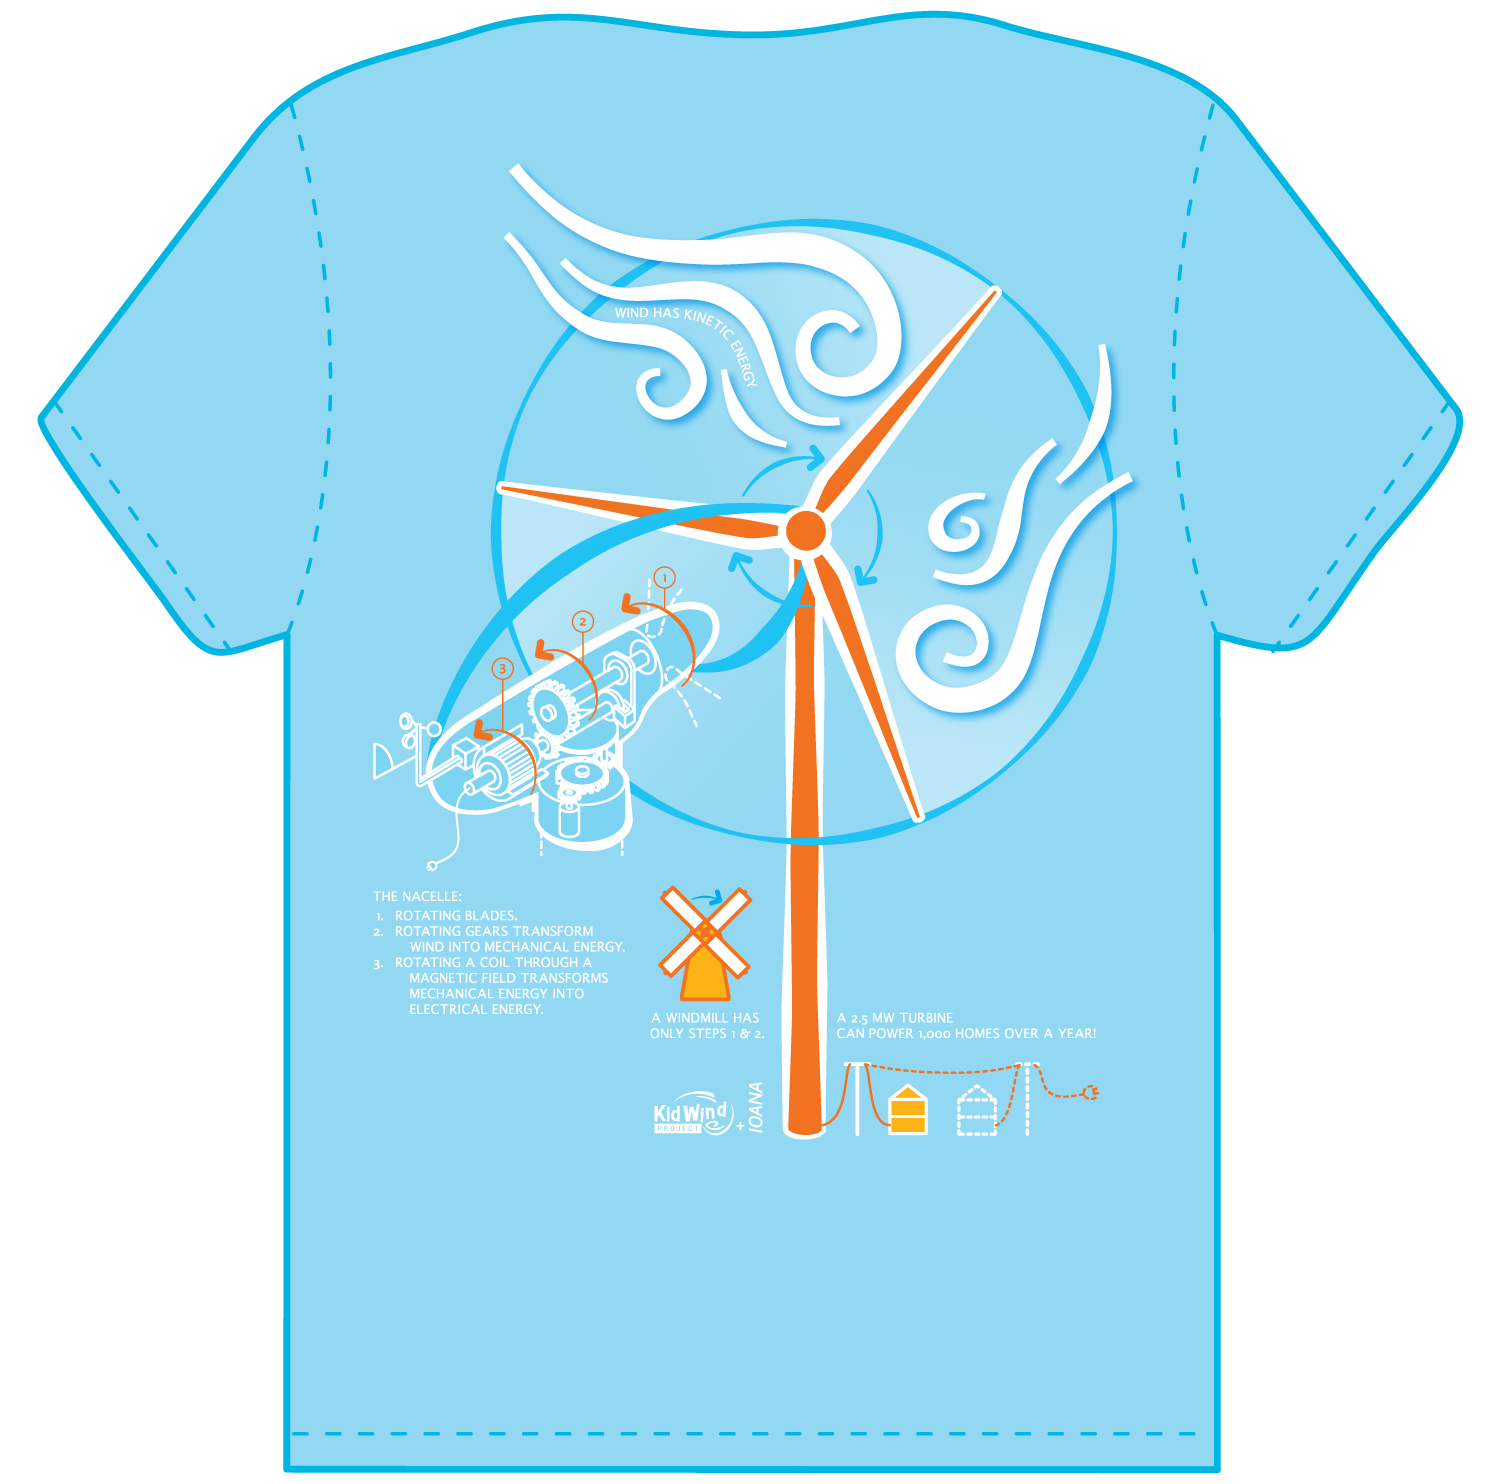 back of T-shirt on wind energy, showing how wind turbine works in detail with a diagram of the nacelle, for KidWind